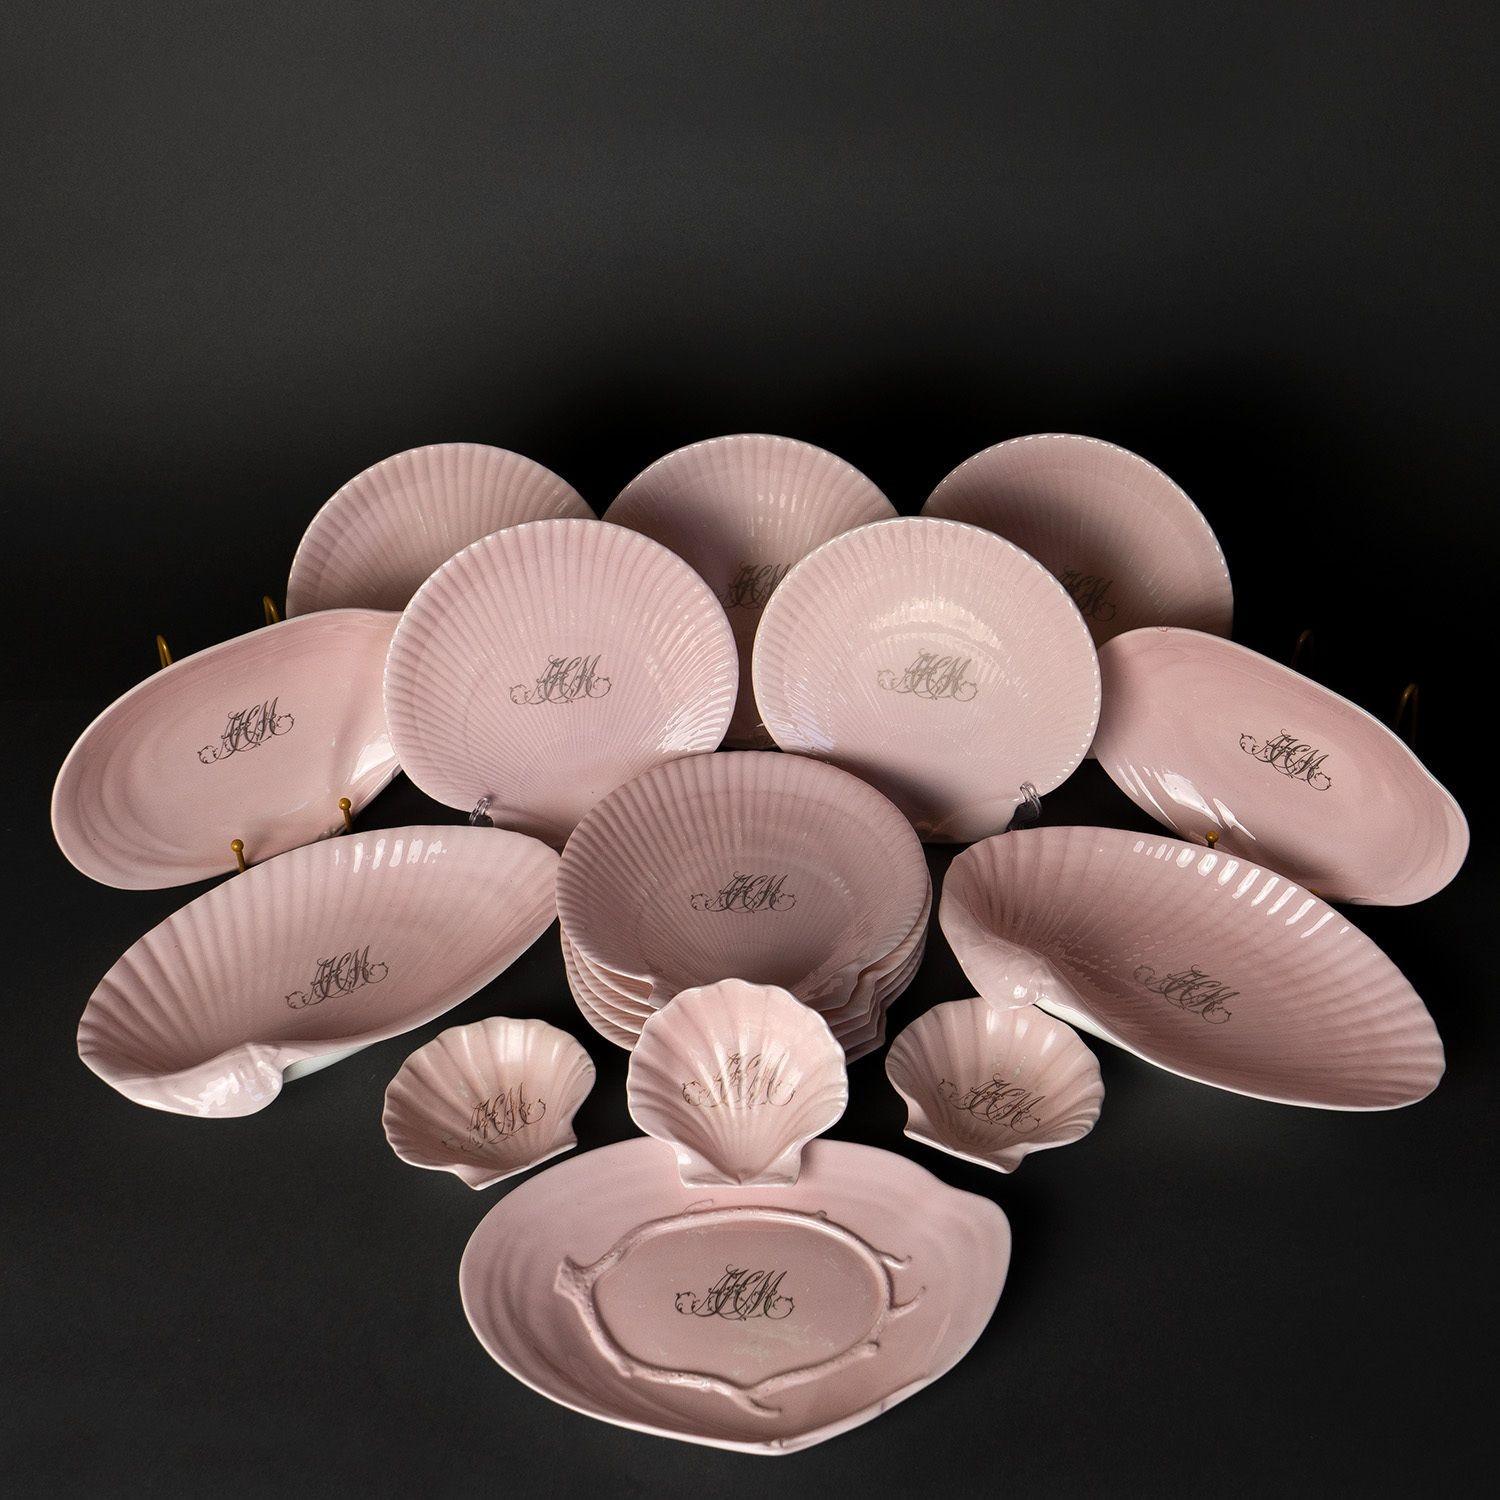 Pink Porcelain 'Nautilus' Dessert Service by Wedgwood for John Mortlock, 1880s For Sale 3